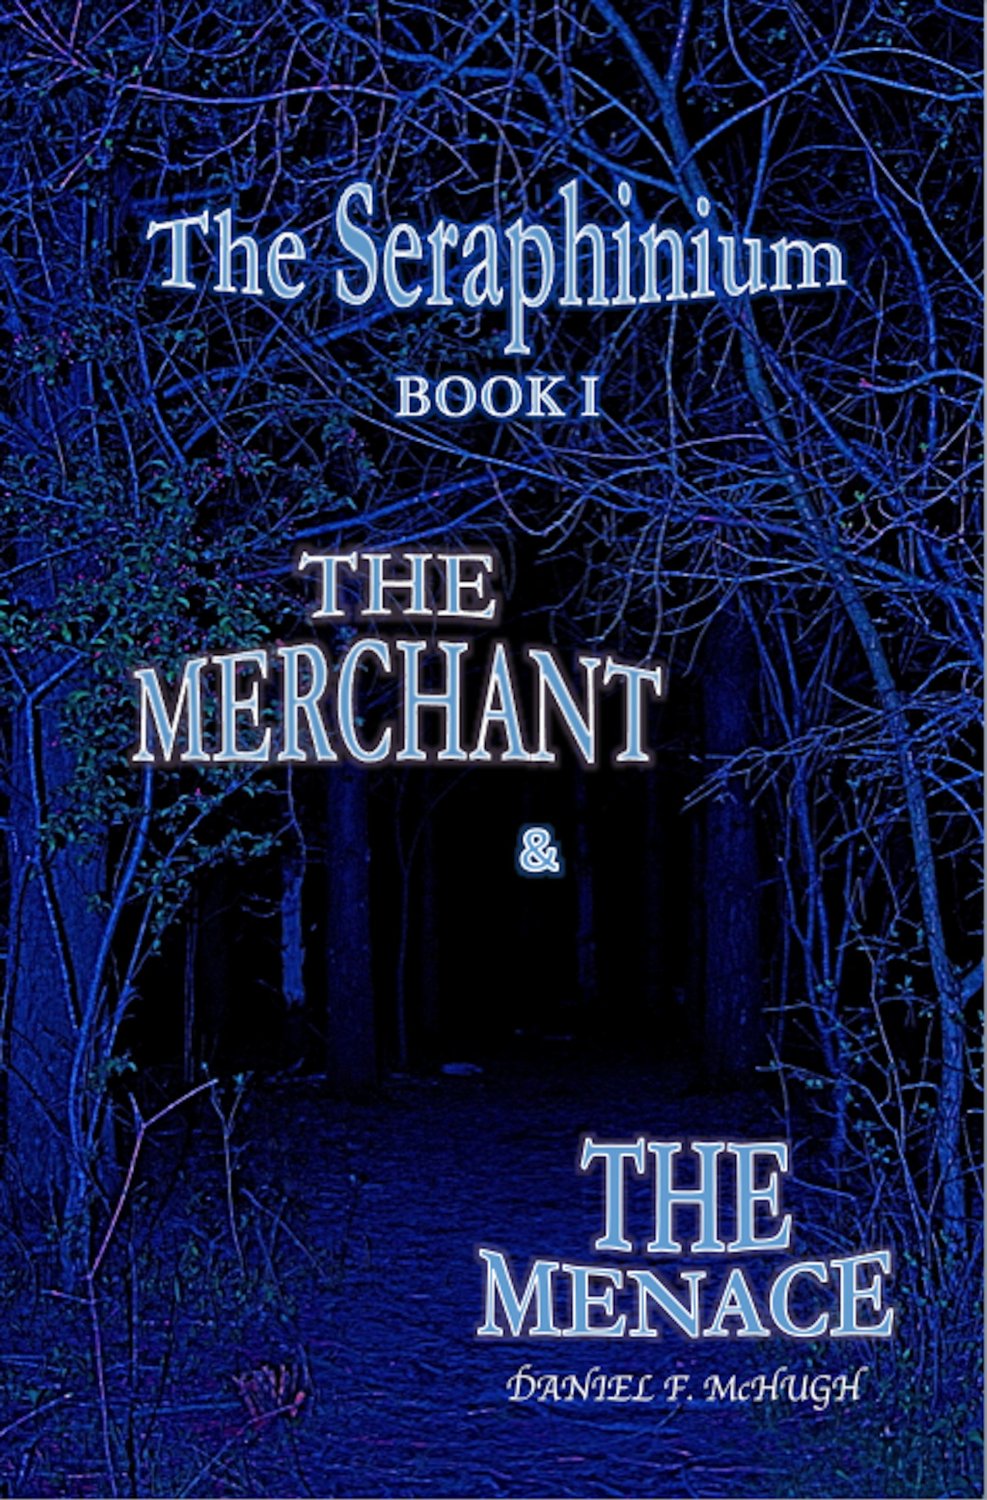 The Merchant and the Menace (The Seraphinium) by Daniel McHugh